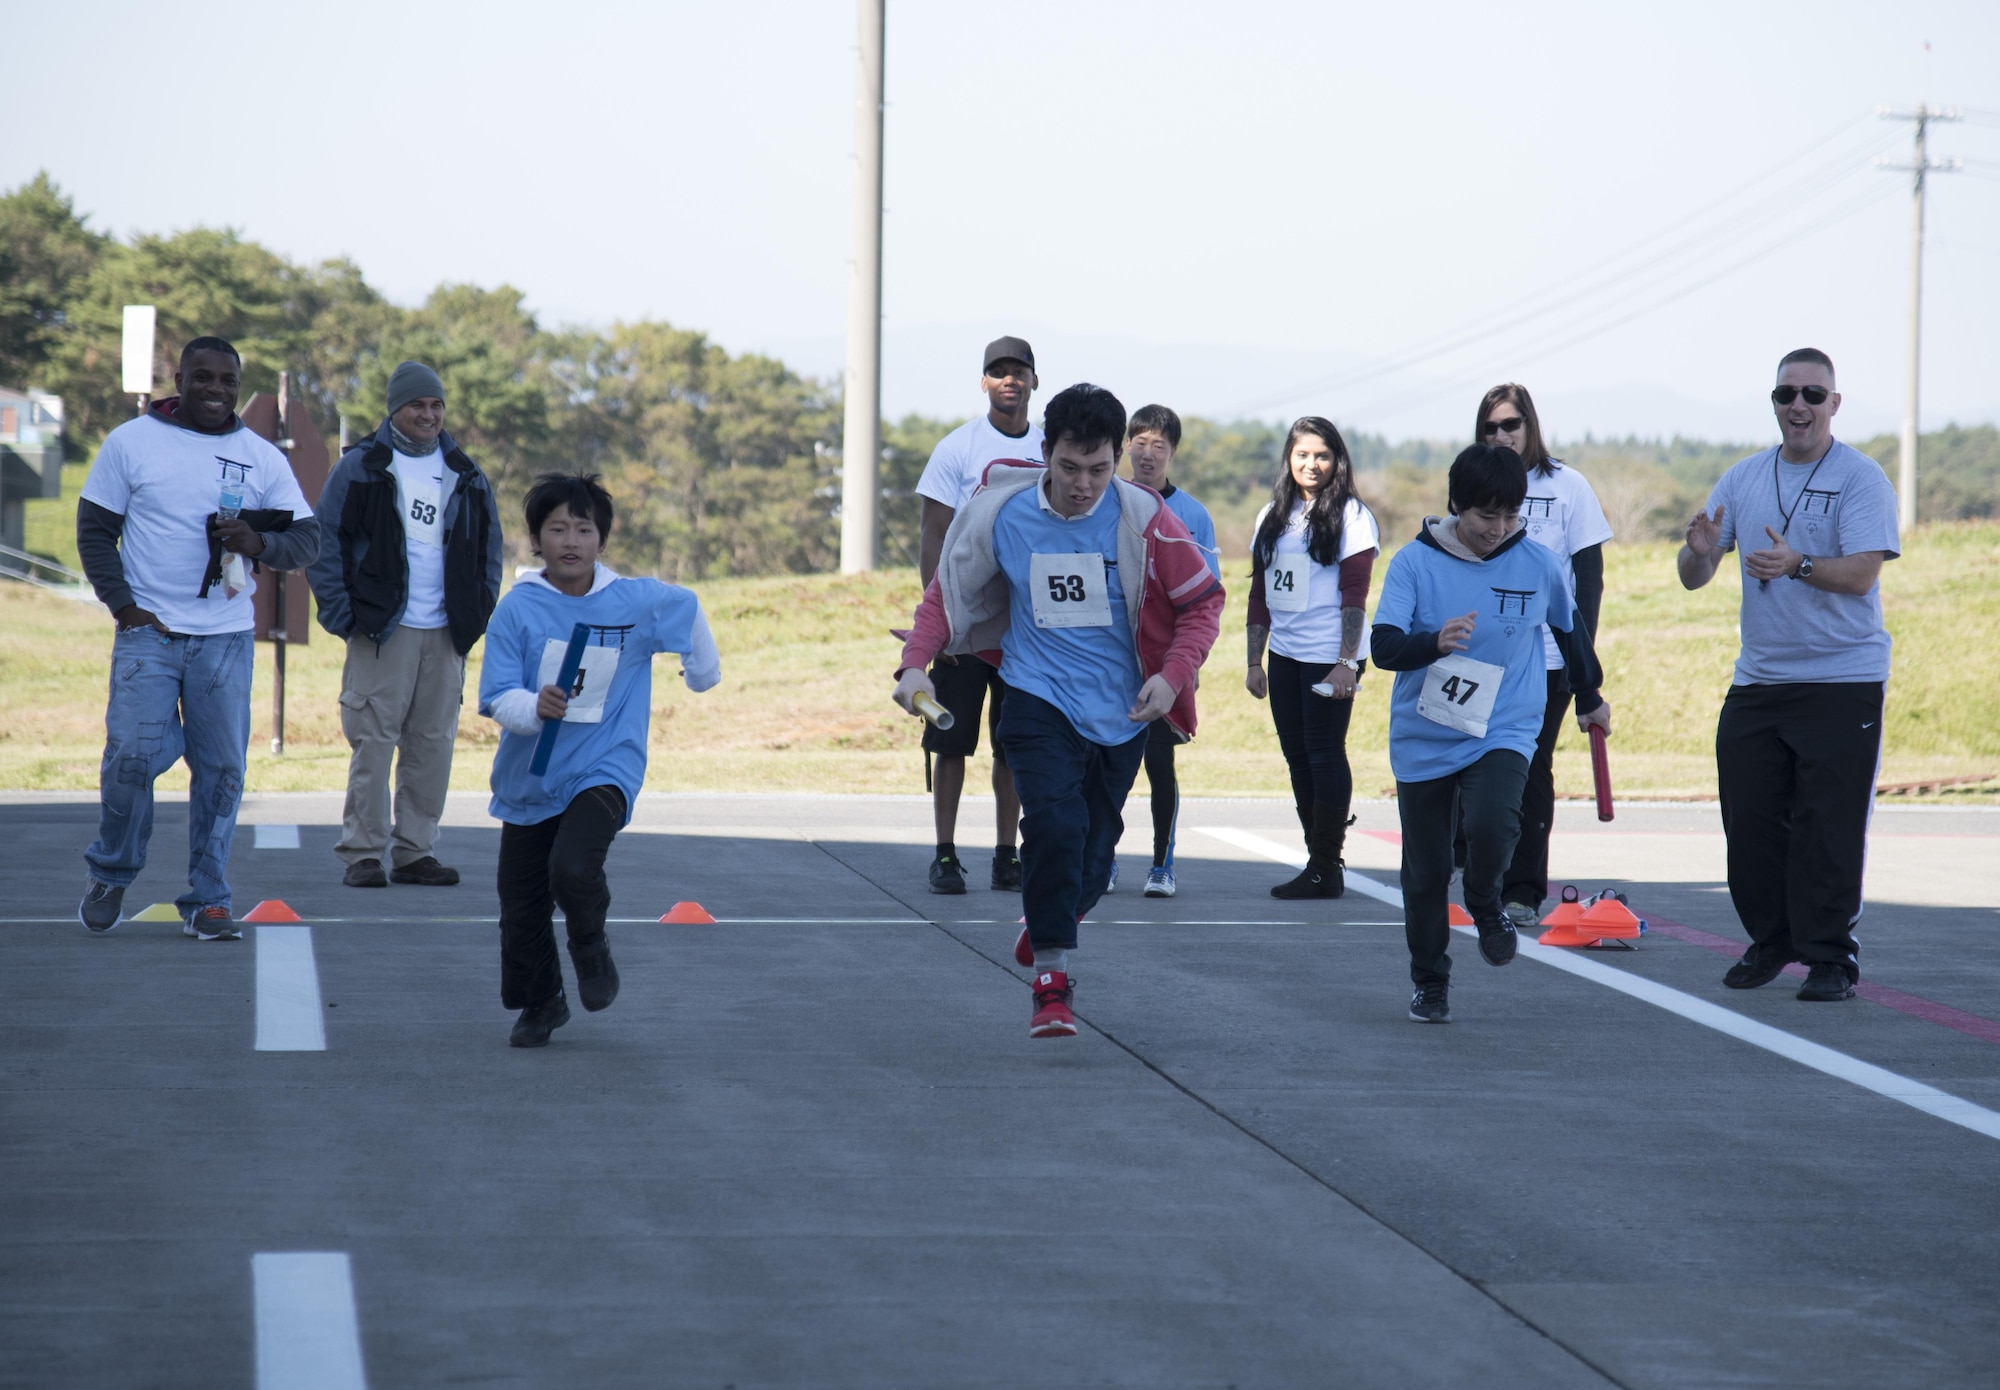 Keigo Imamiya, left, Izumi Yusuke, center, and Akemi Harata, right, Special Olympic athletes, participate in a 100-meter relay race during the 30th Annual Special Olympics at Misawa Air Base, Japan, Oct. 15, 2016. The event was held to get the local community involved and to continue to foster the relationship between the 35th Fighter Wing and Japanese nationals. (U.S. Air Force photo by Airman 1st Class Sadie Colbert)